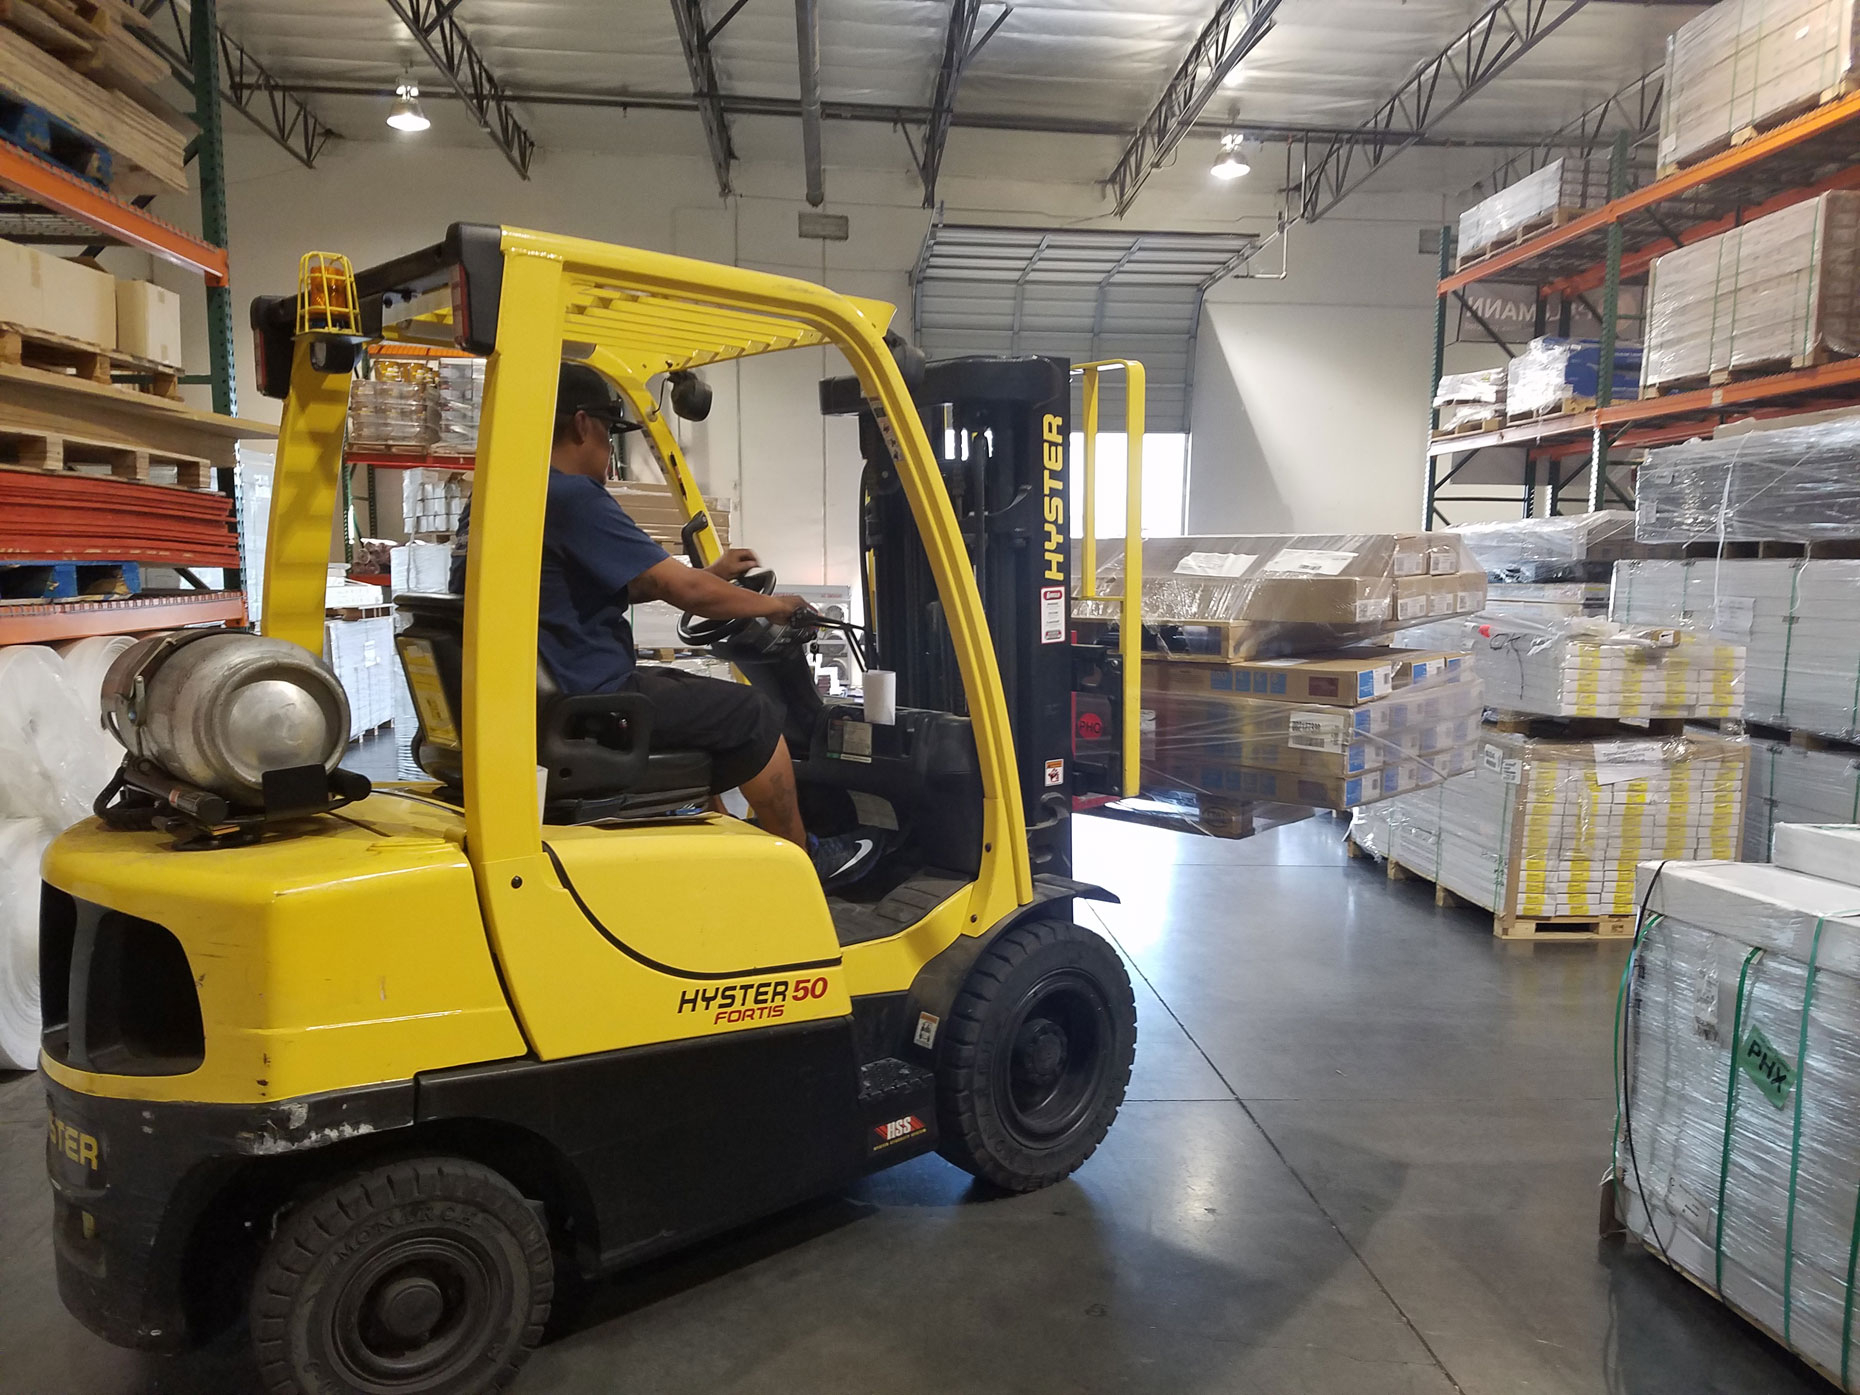 Using forklift in the warehouse